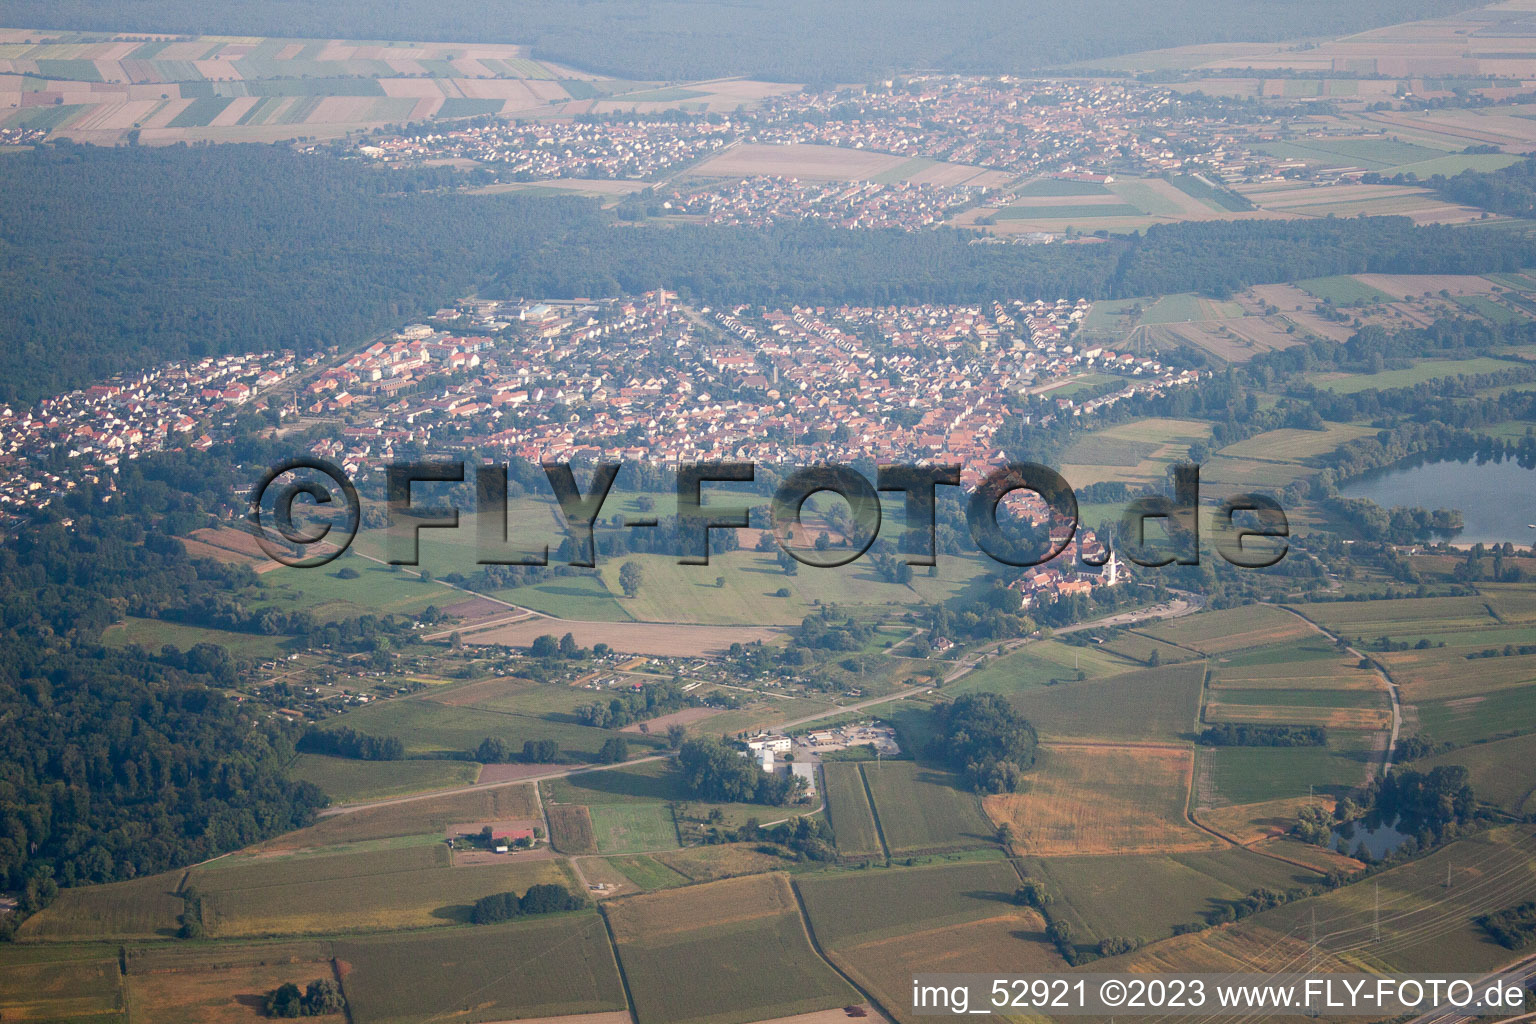 Jockgrim in the state Rhineland-Palatinate, Germany from above